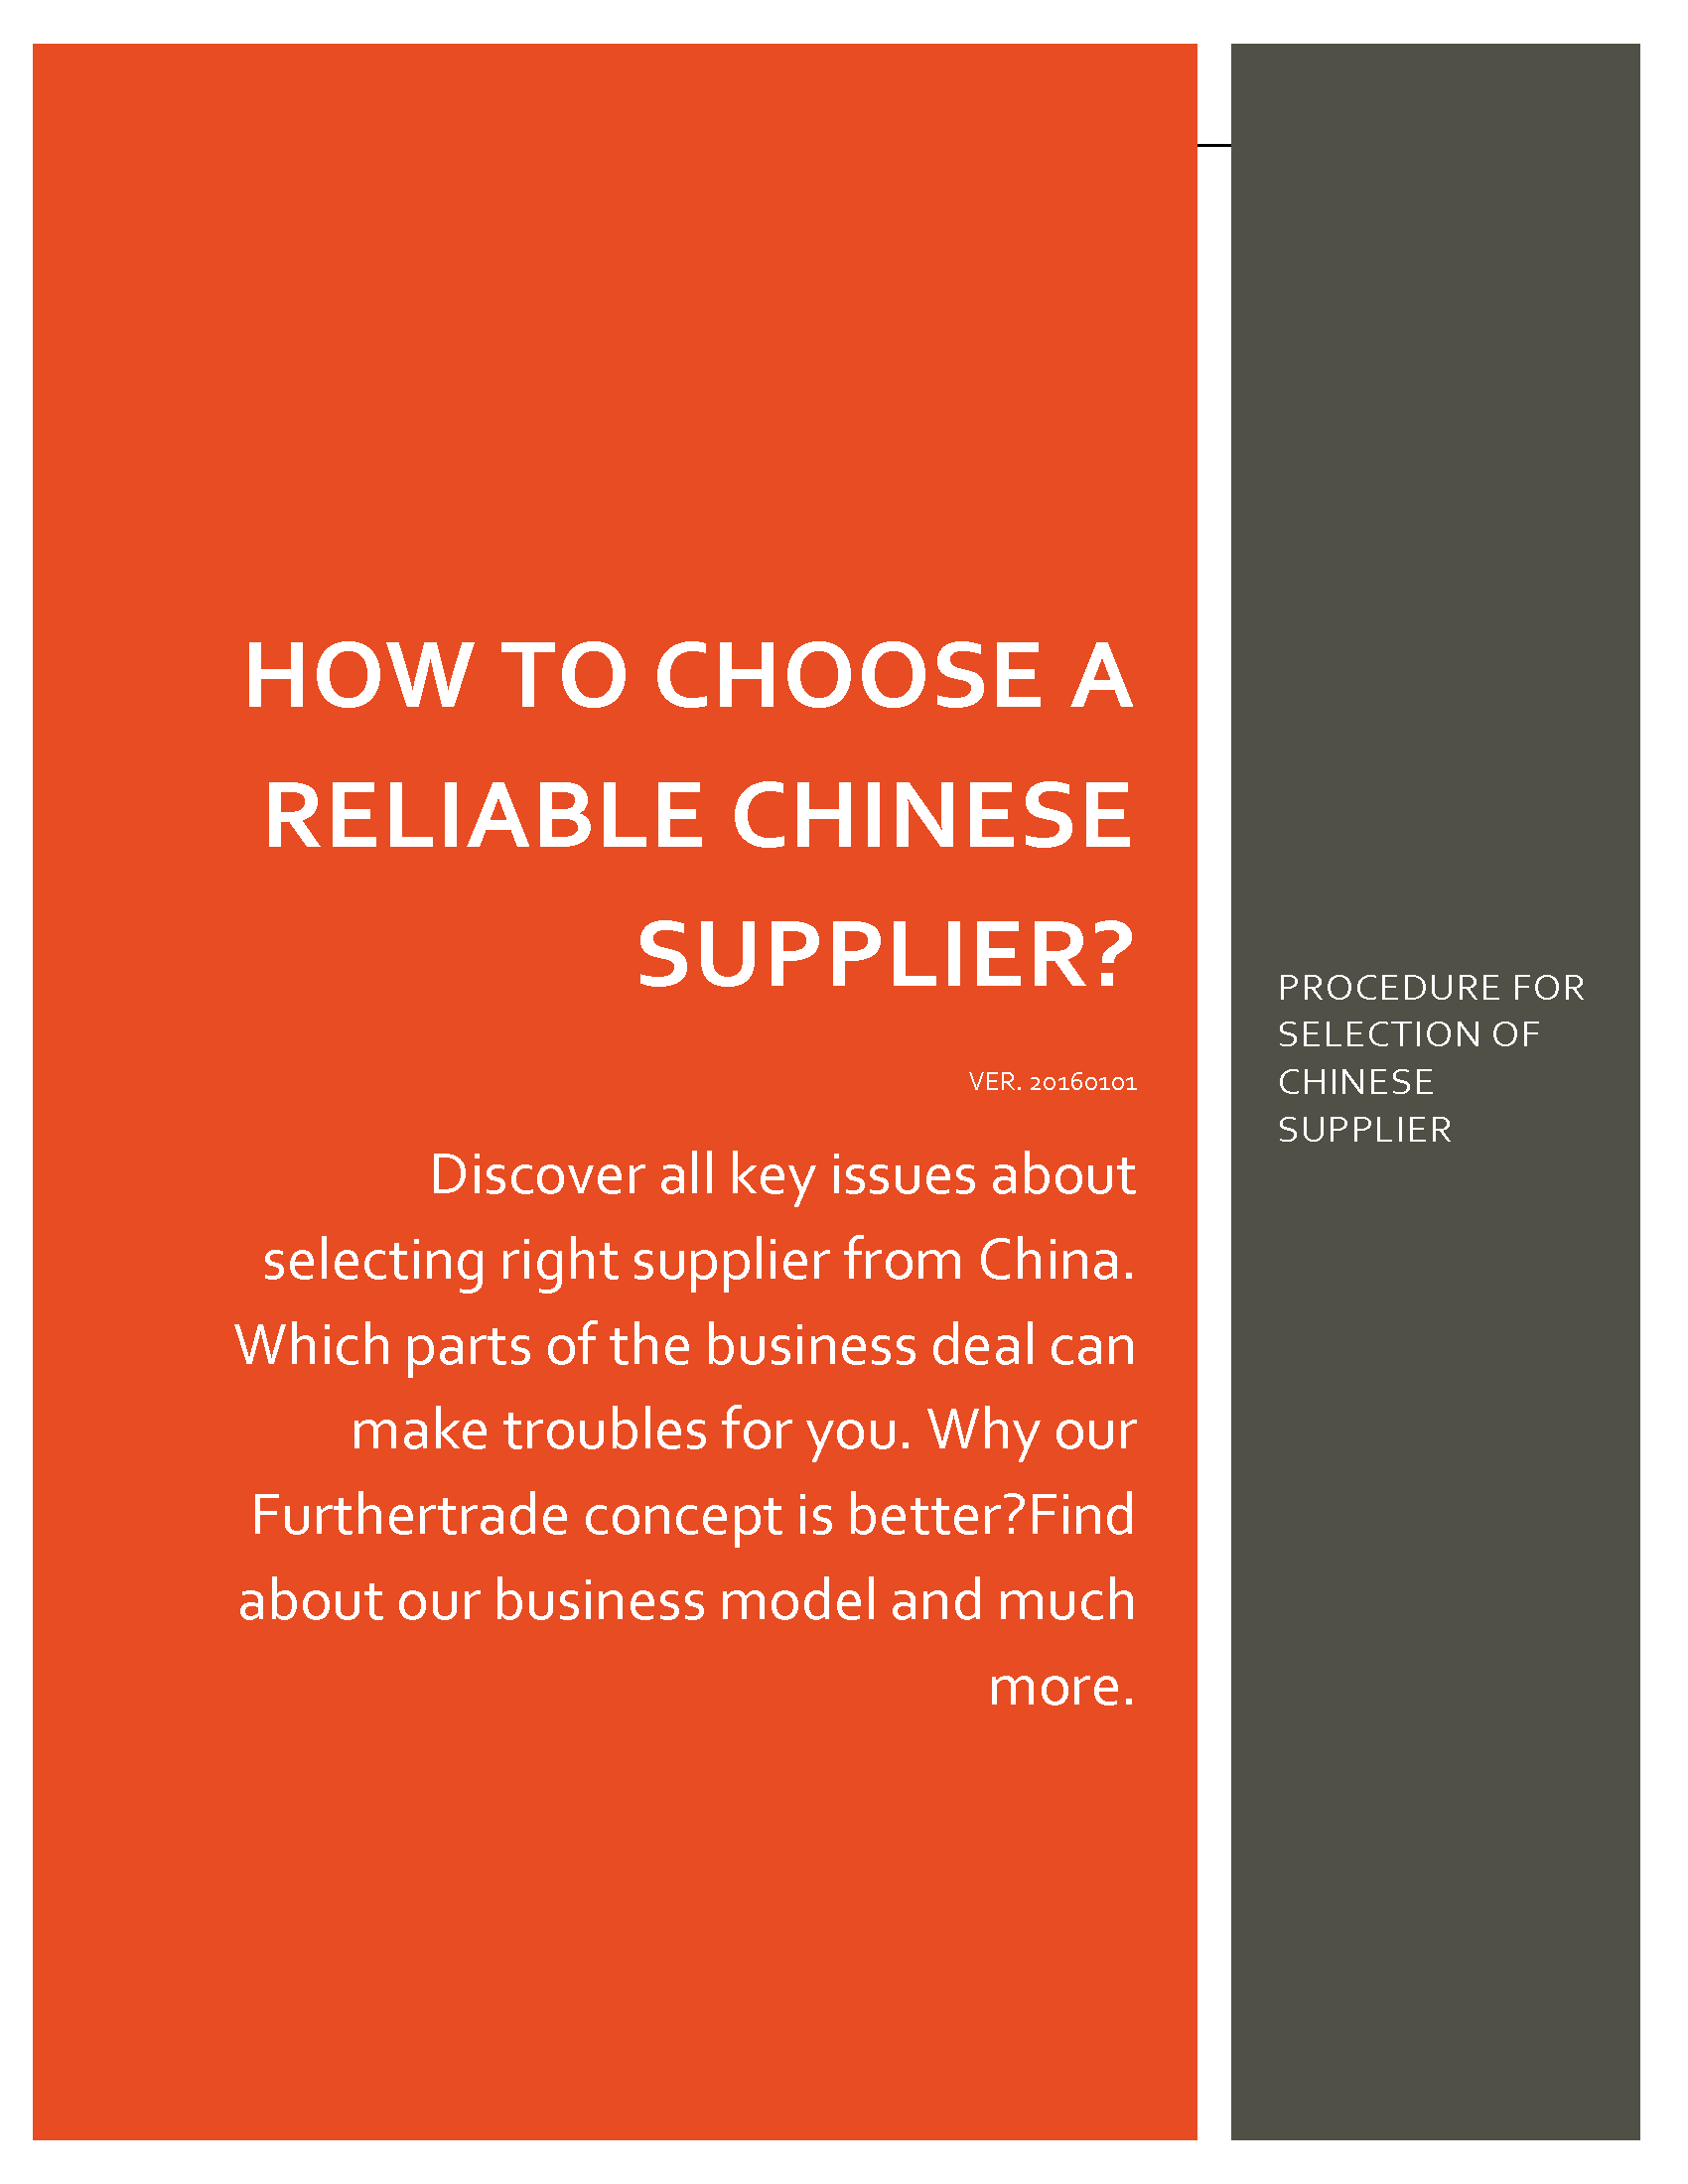 HOW TO CHOOSE A RELIABLE CHINESE SUPPLIER